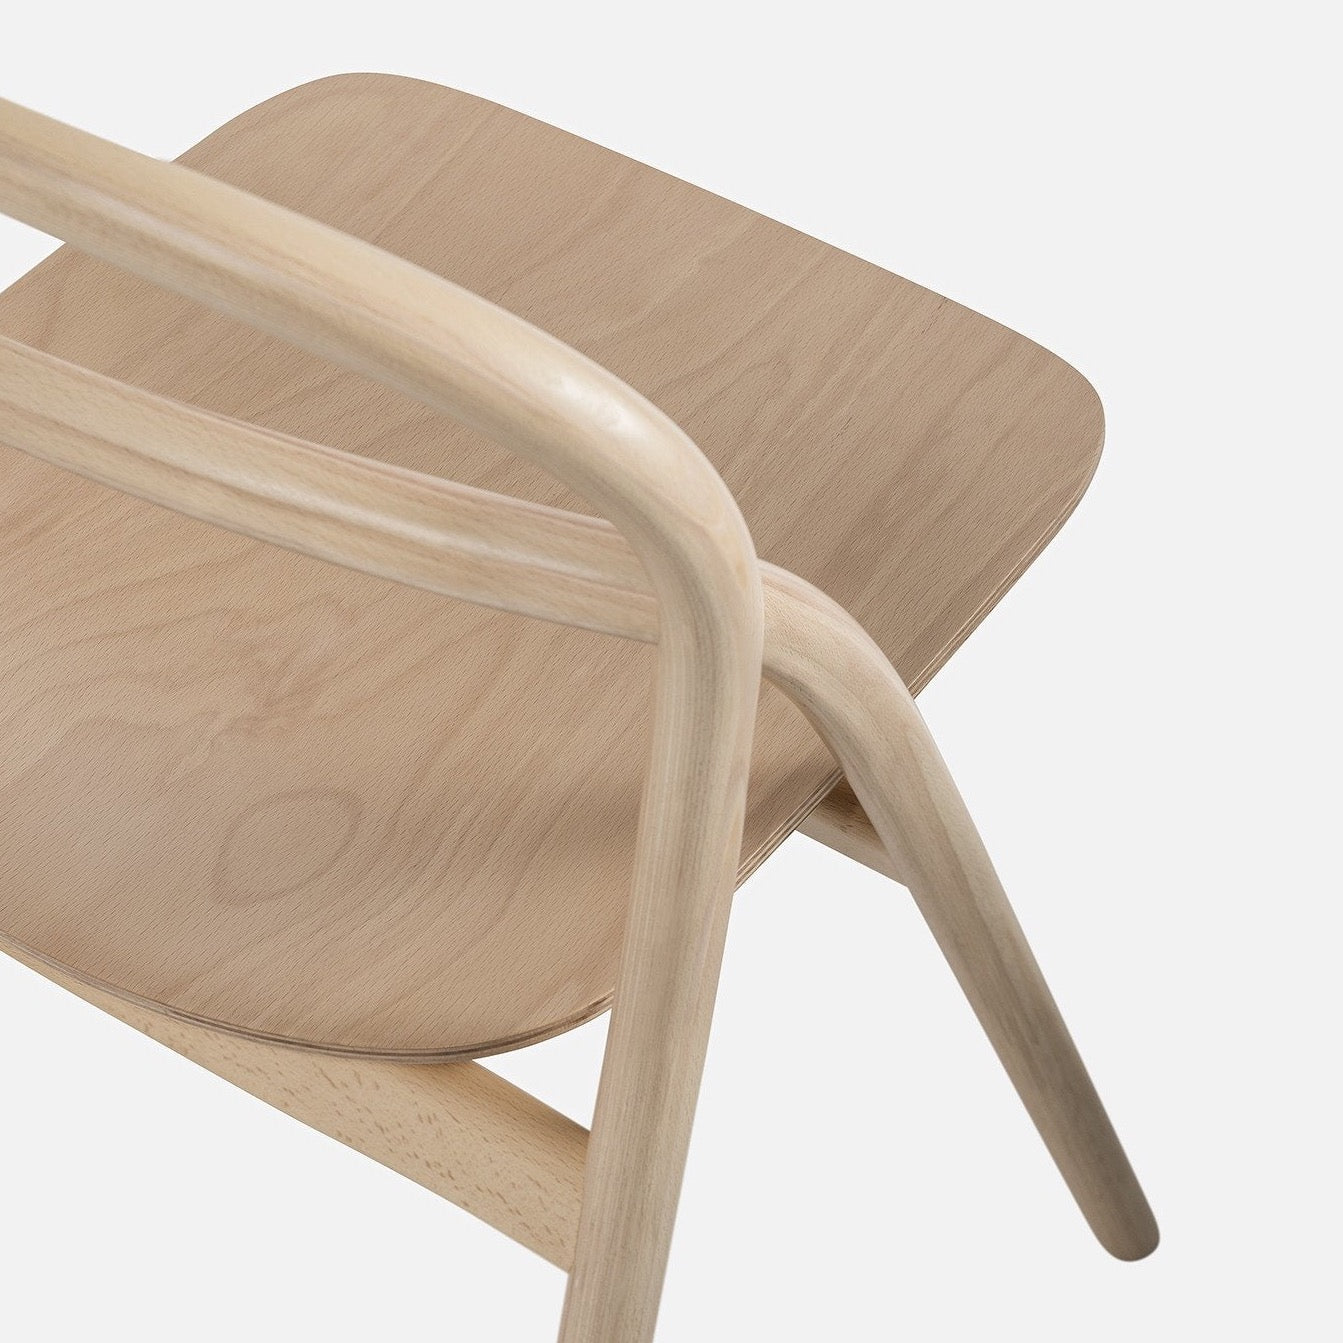 Udon Chair